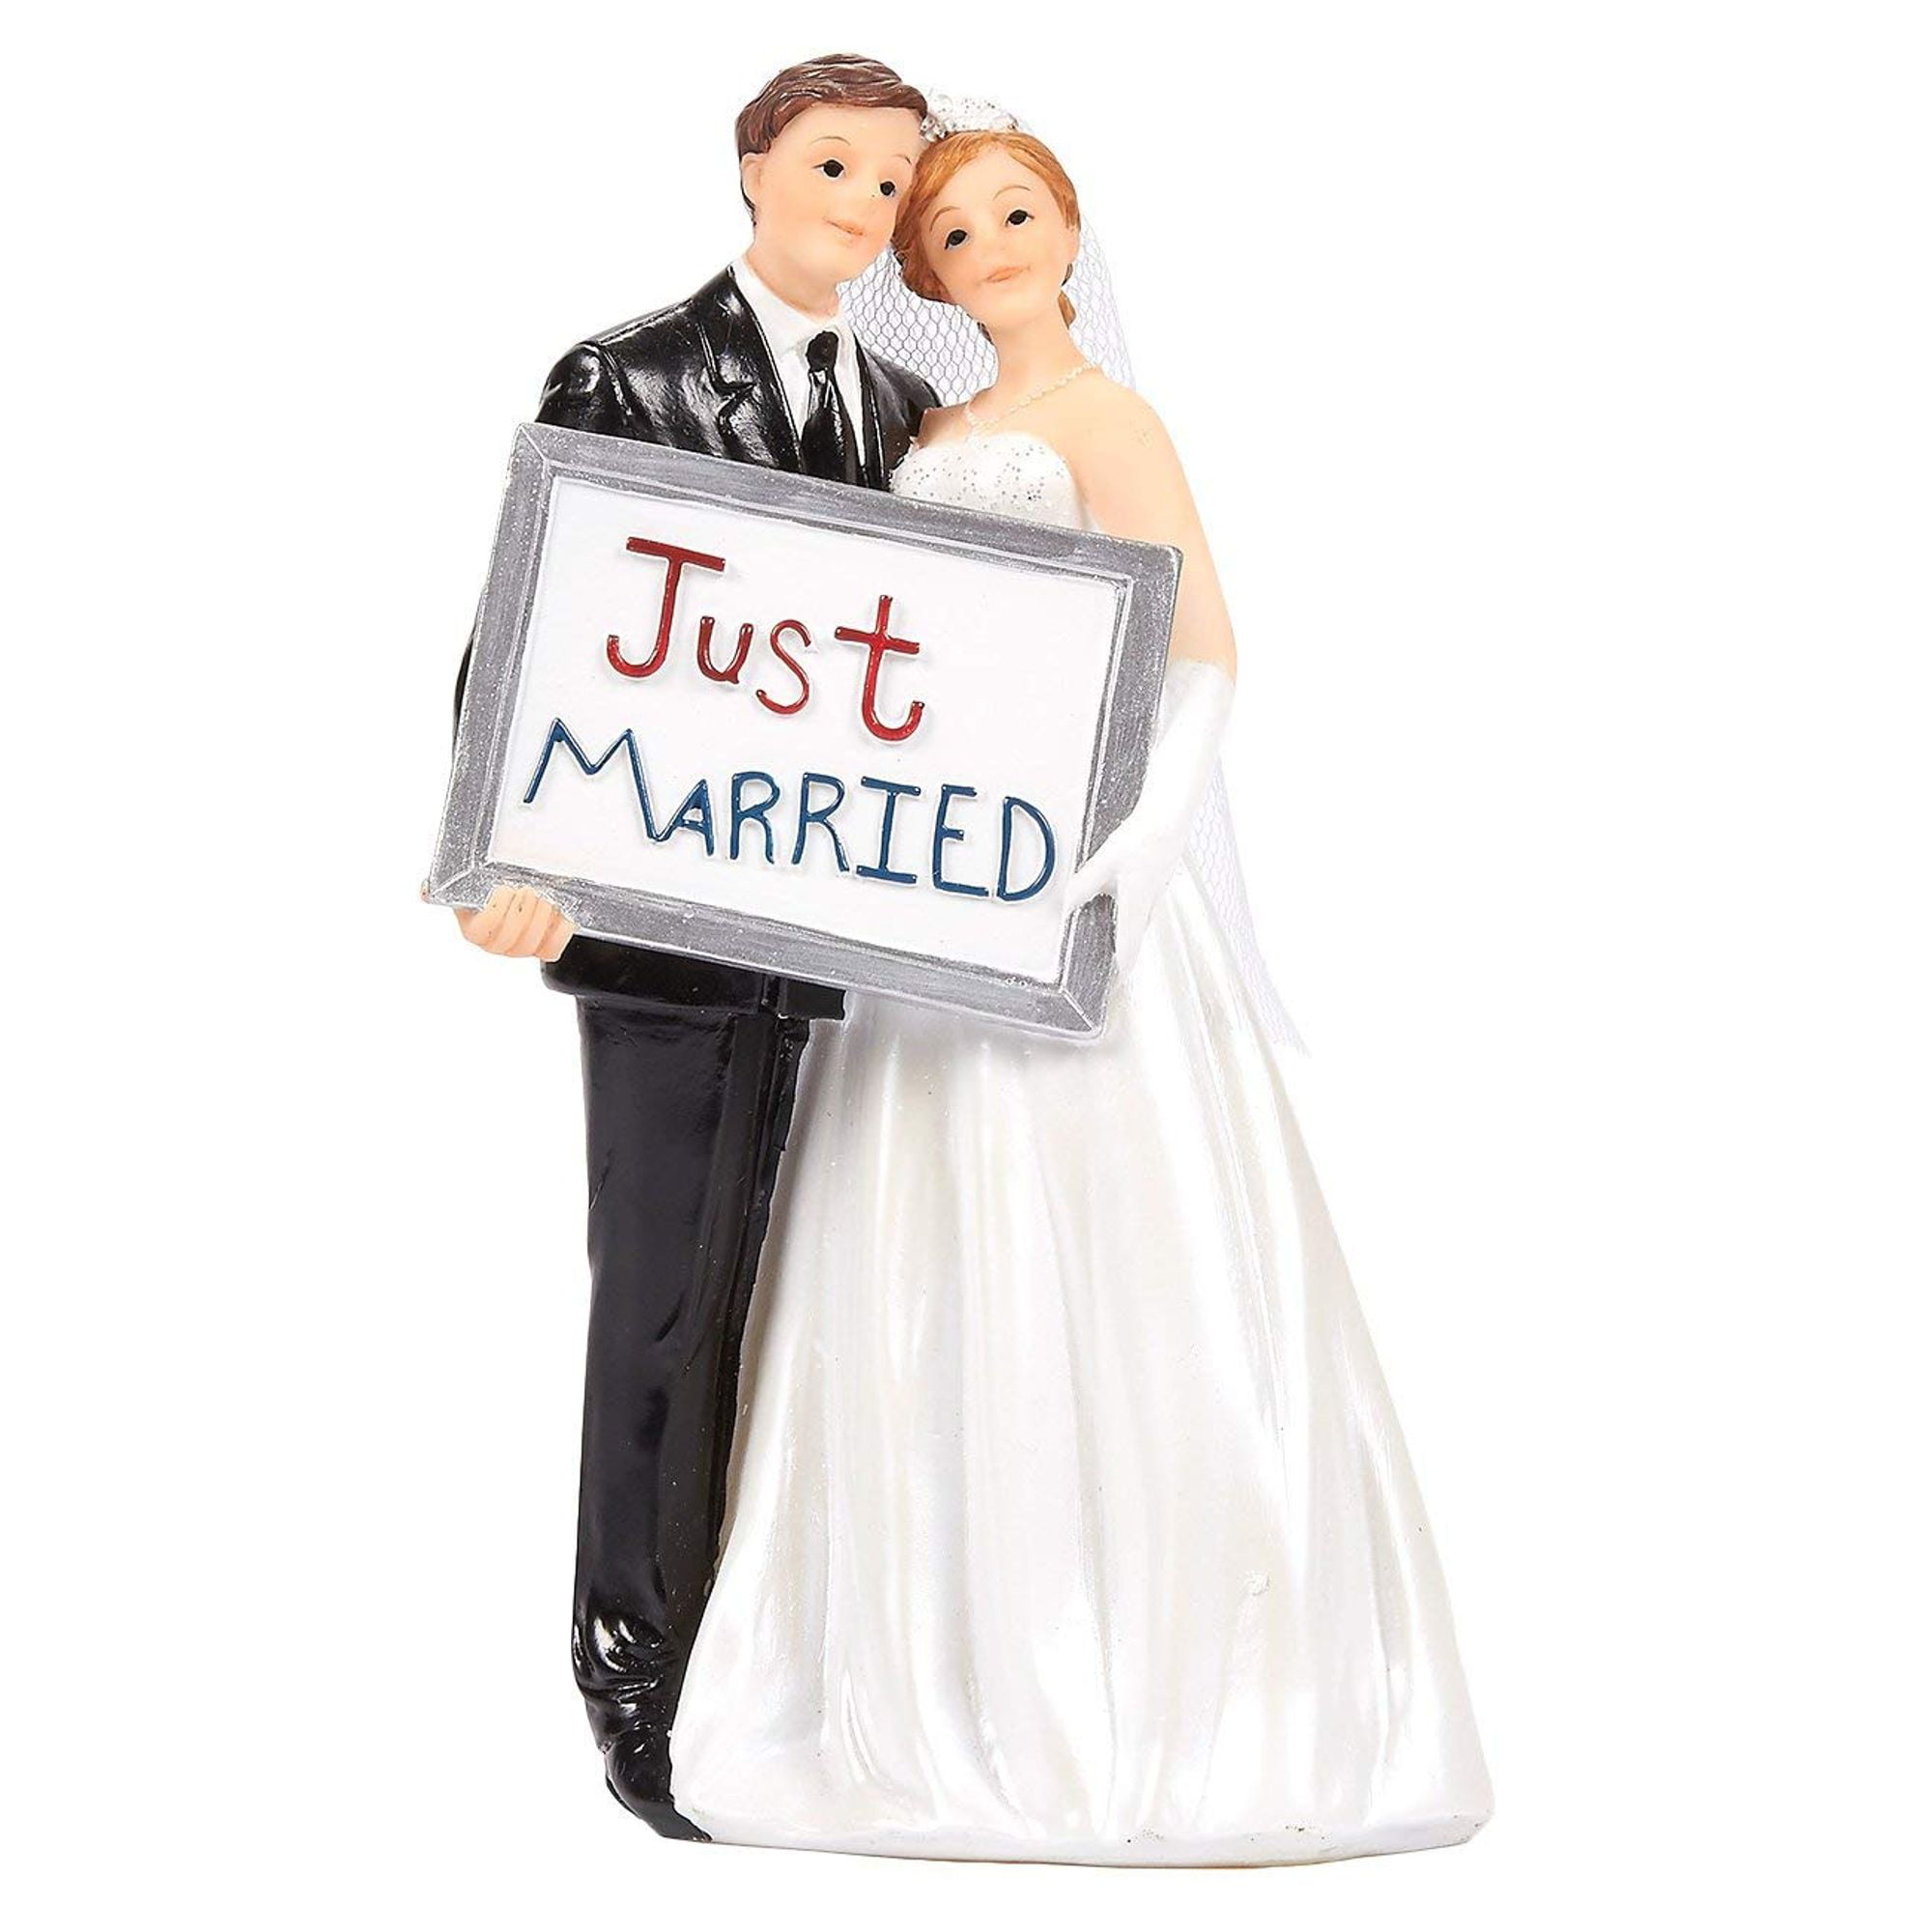 Wedding Cake Toppers Bride Groom Cake Topper Figurines Holding Just Married Board Fun Cake Topper For Wedding Decorations And Gifts 3 3 X 5 8 X 2 25 Inches Walmart Com Walmart Com